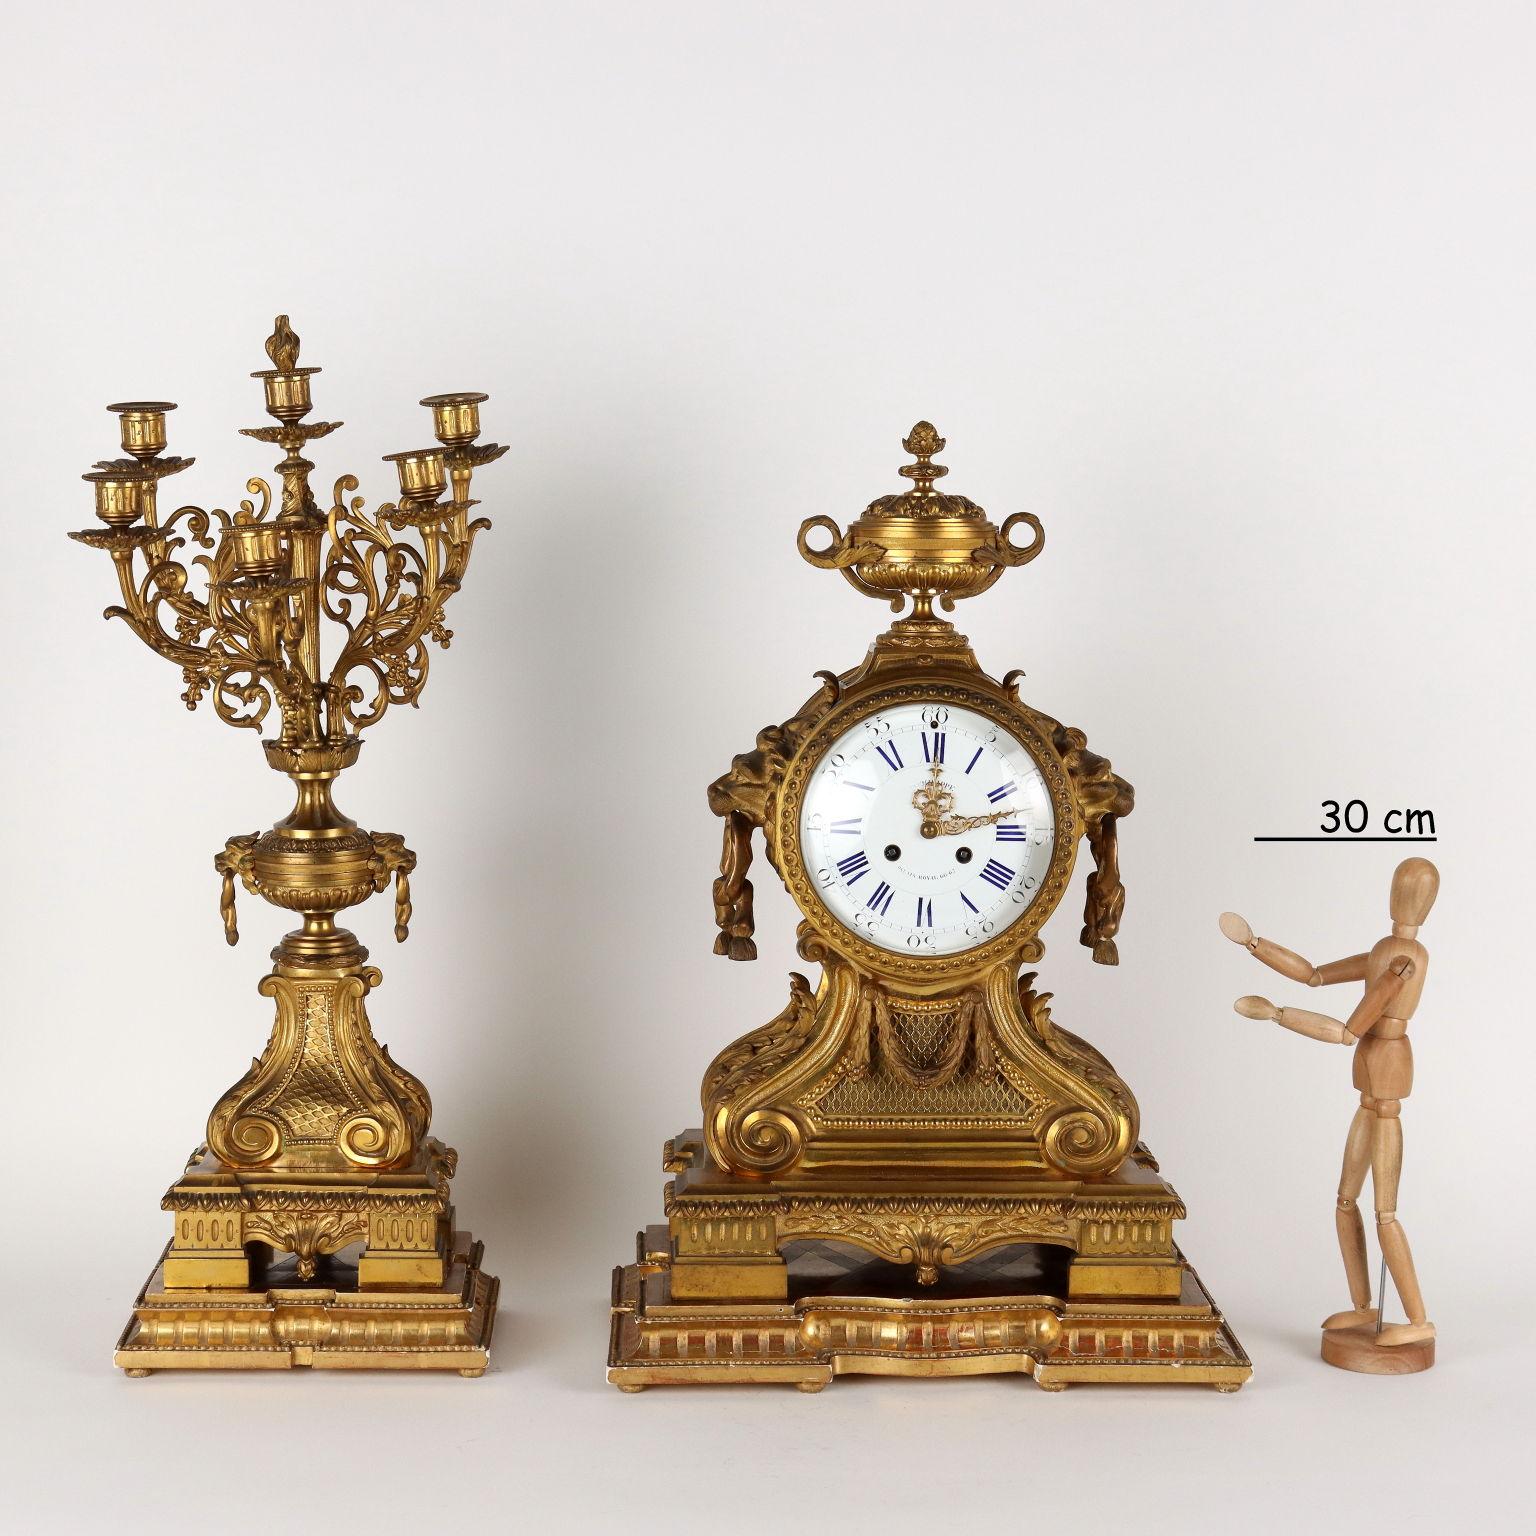 Triptych clock in gilded and chiseled bronze with carved and gilded wooden bases. The clock with a large rectangular base features finely worked burin decorations with leaf volutes, garlands, lion protomes and a cup-shaped vase at the top. Enamelled